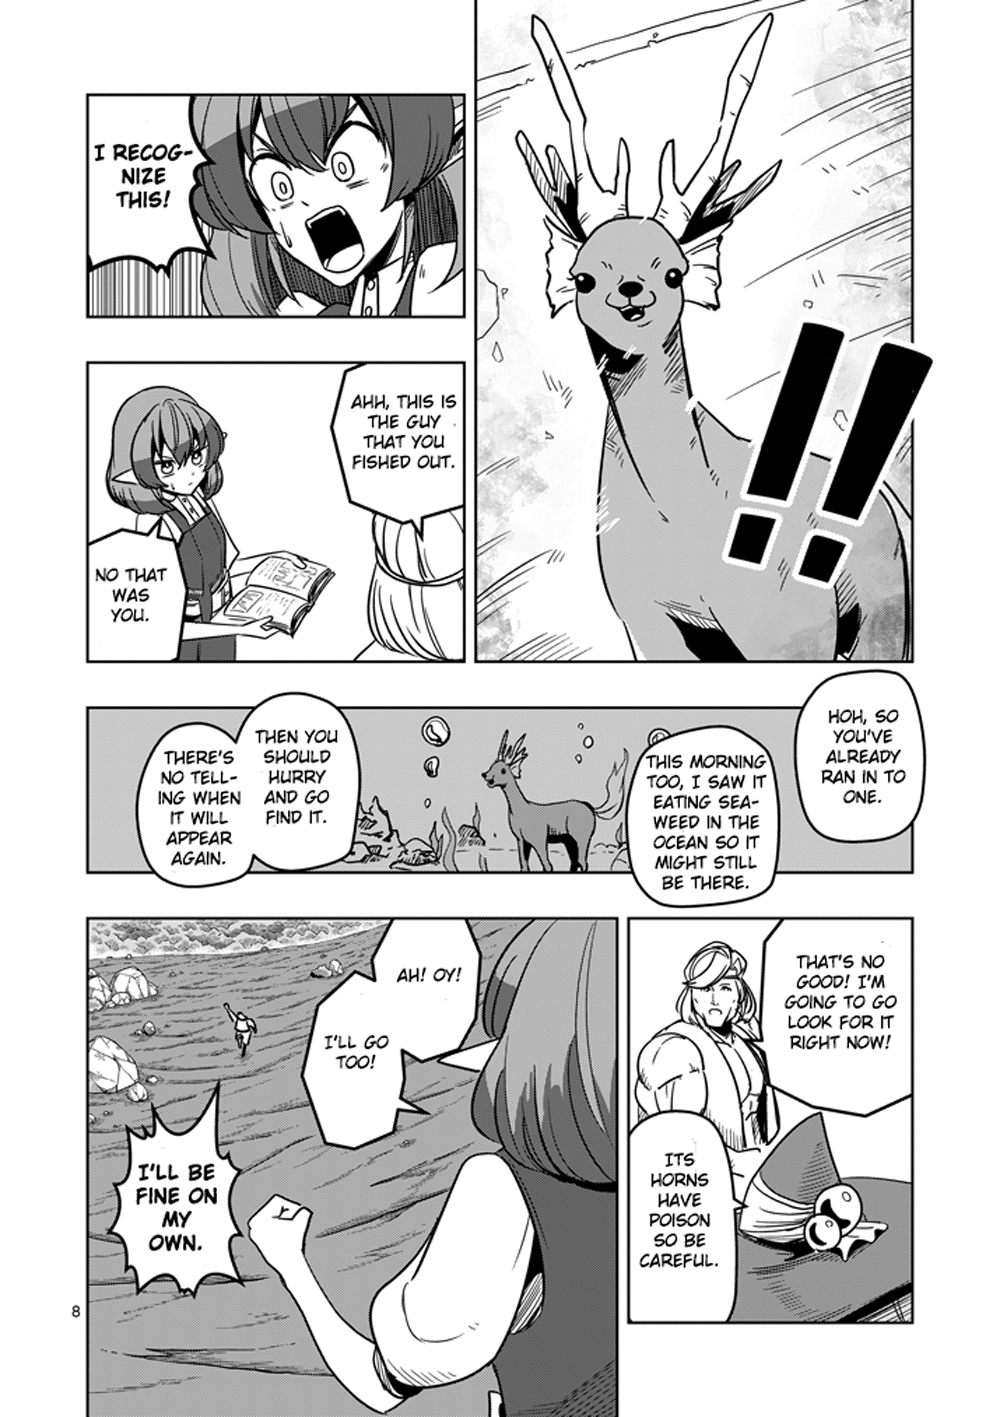 Helck Ch.23